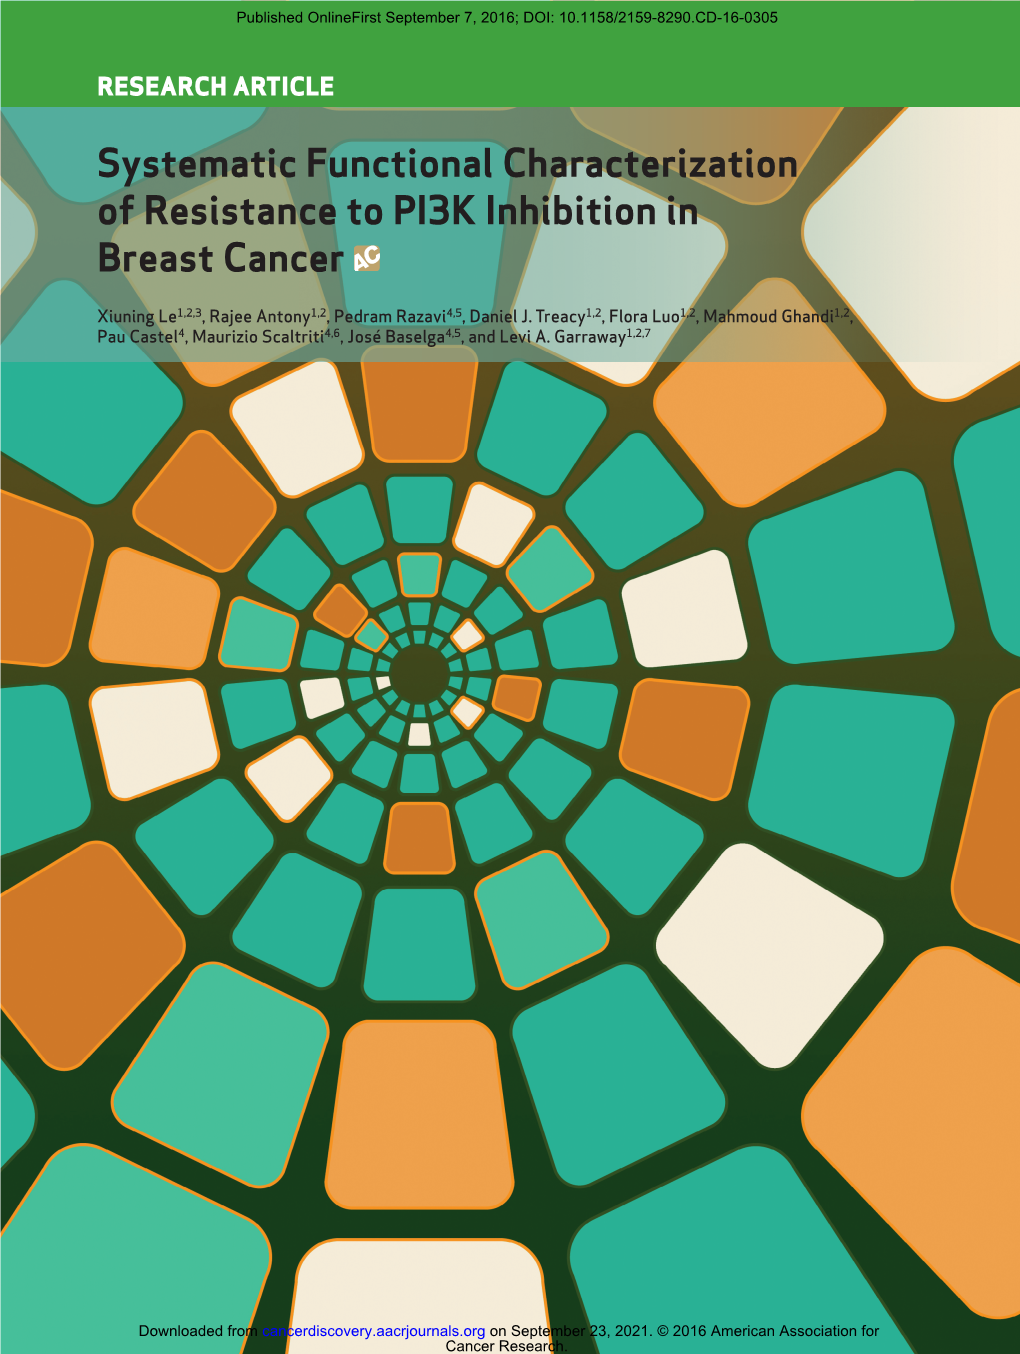 Systematic Functional Characterization of Resistance to PI3K Inhibition in Breast Cancer